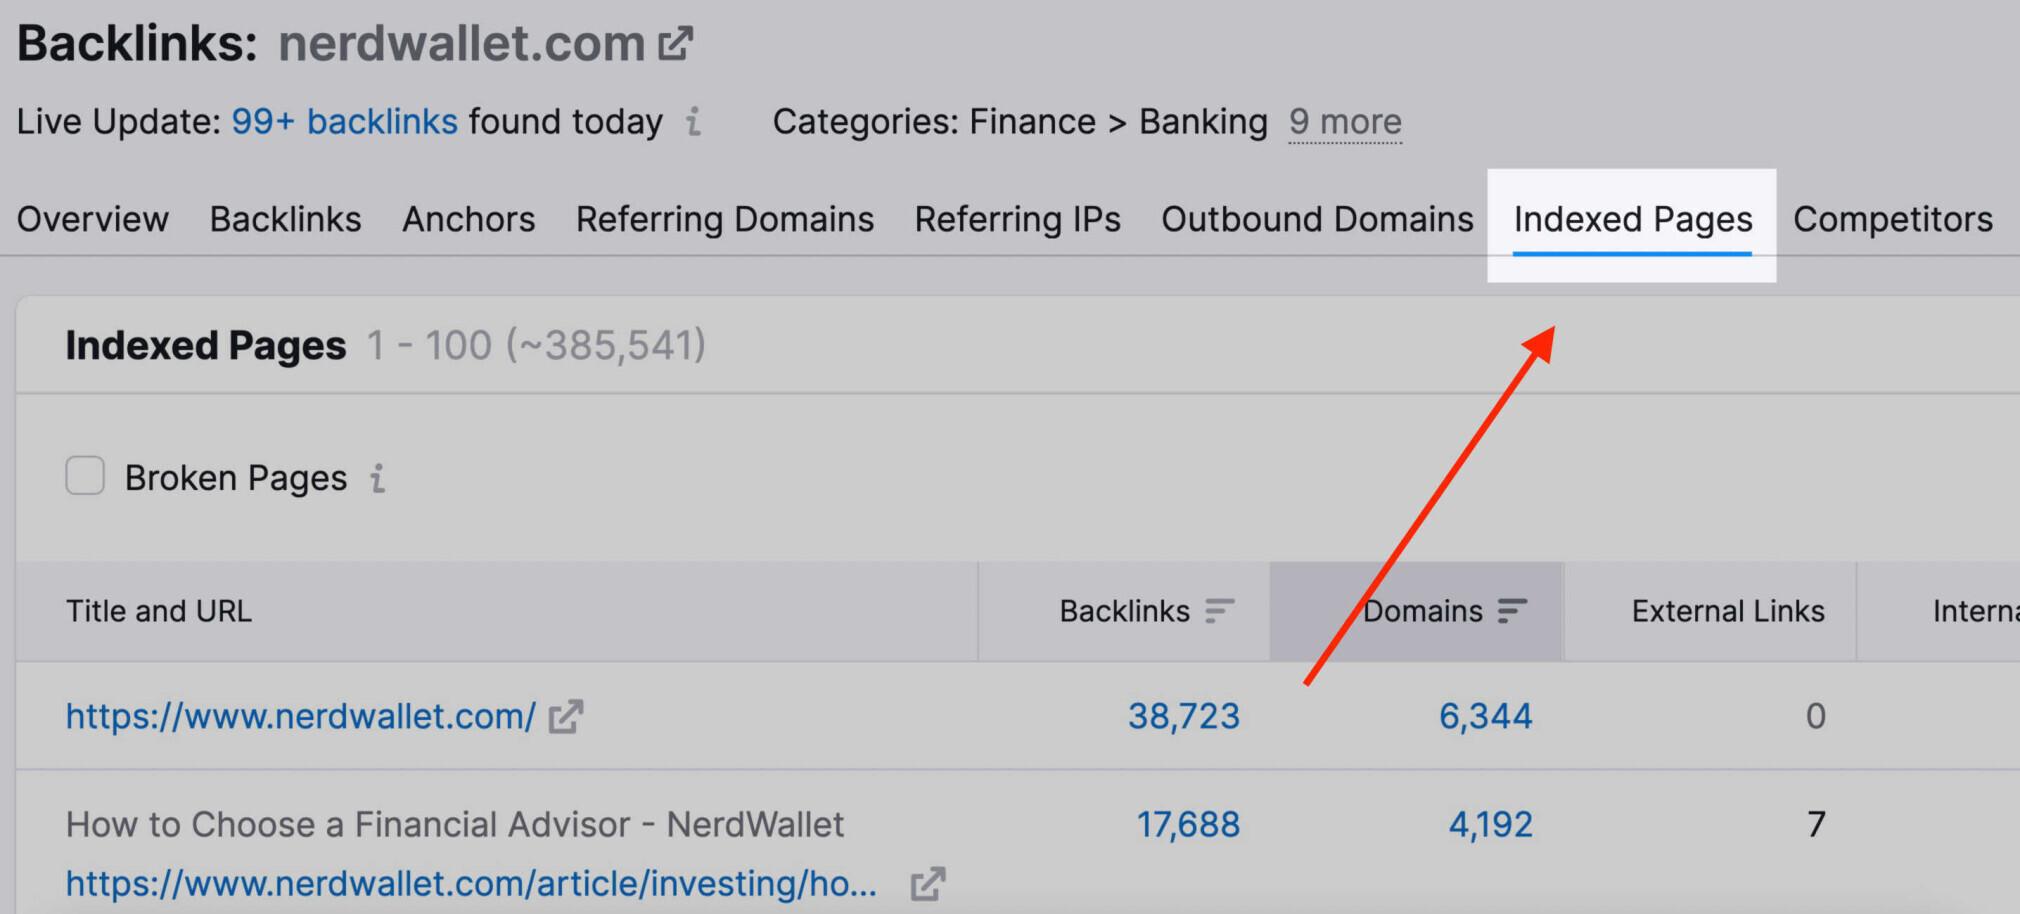 Indexed Pages report in Backlink Analytics